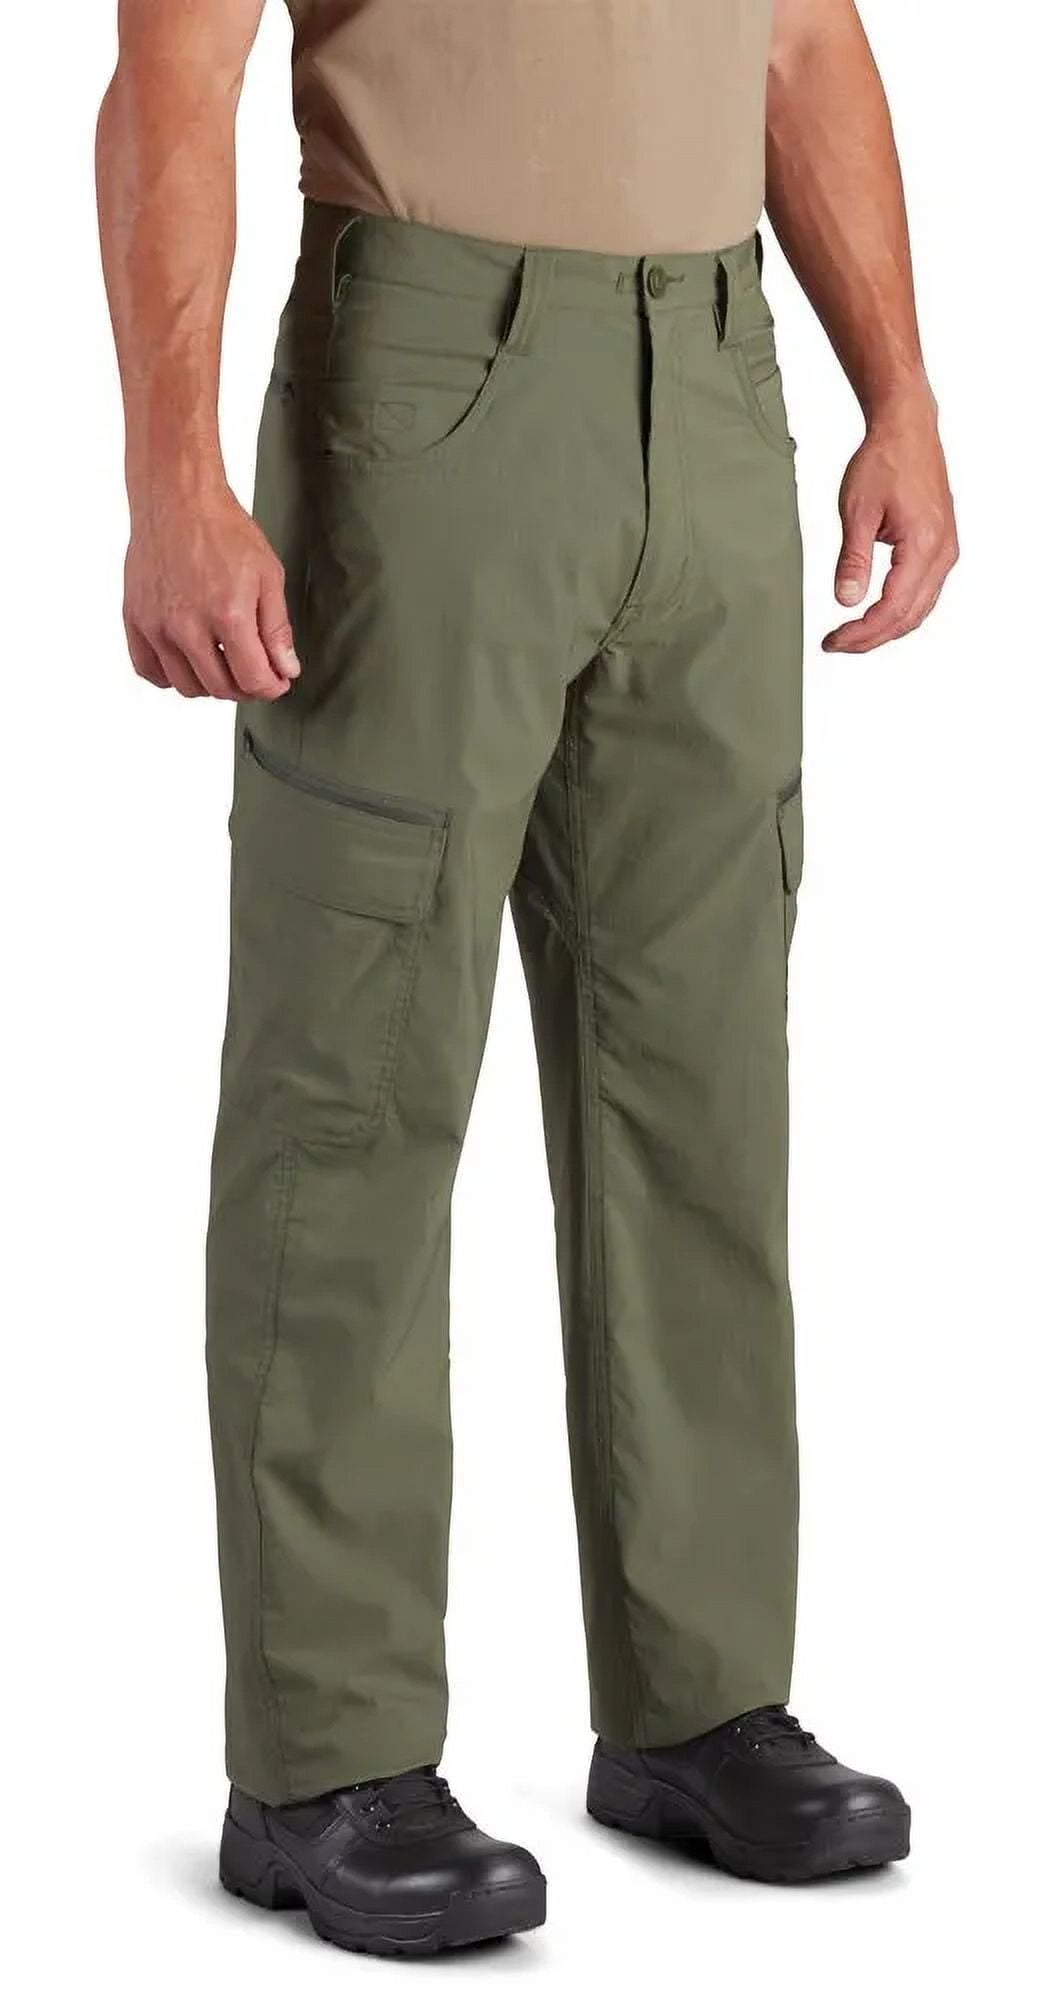 Midnite Blue - Tactical Pants with Stain Resistant Coating